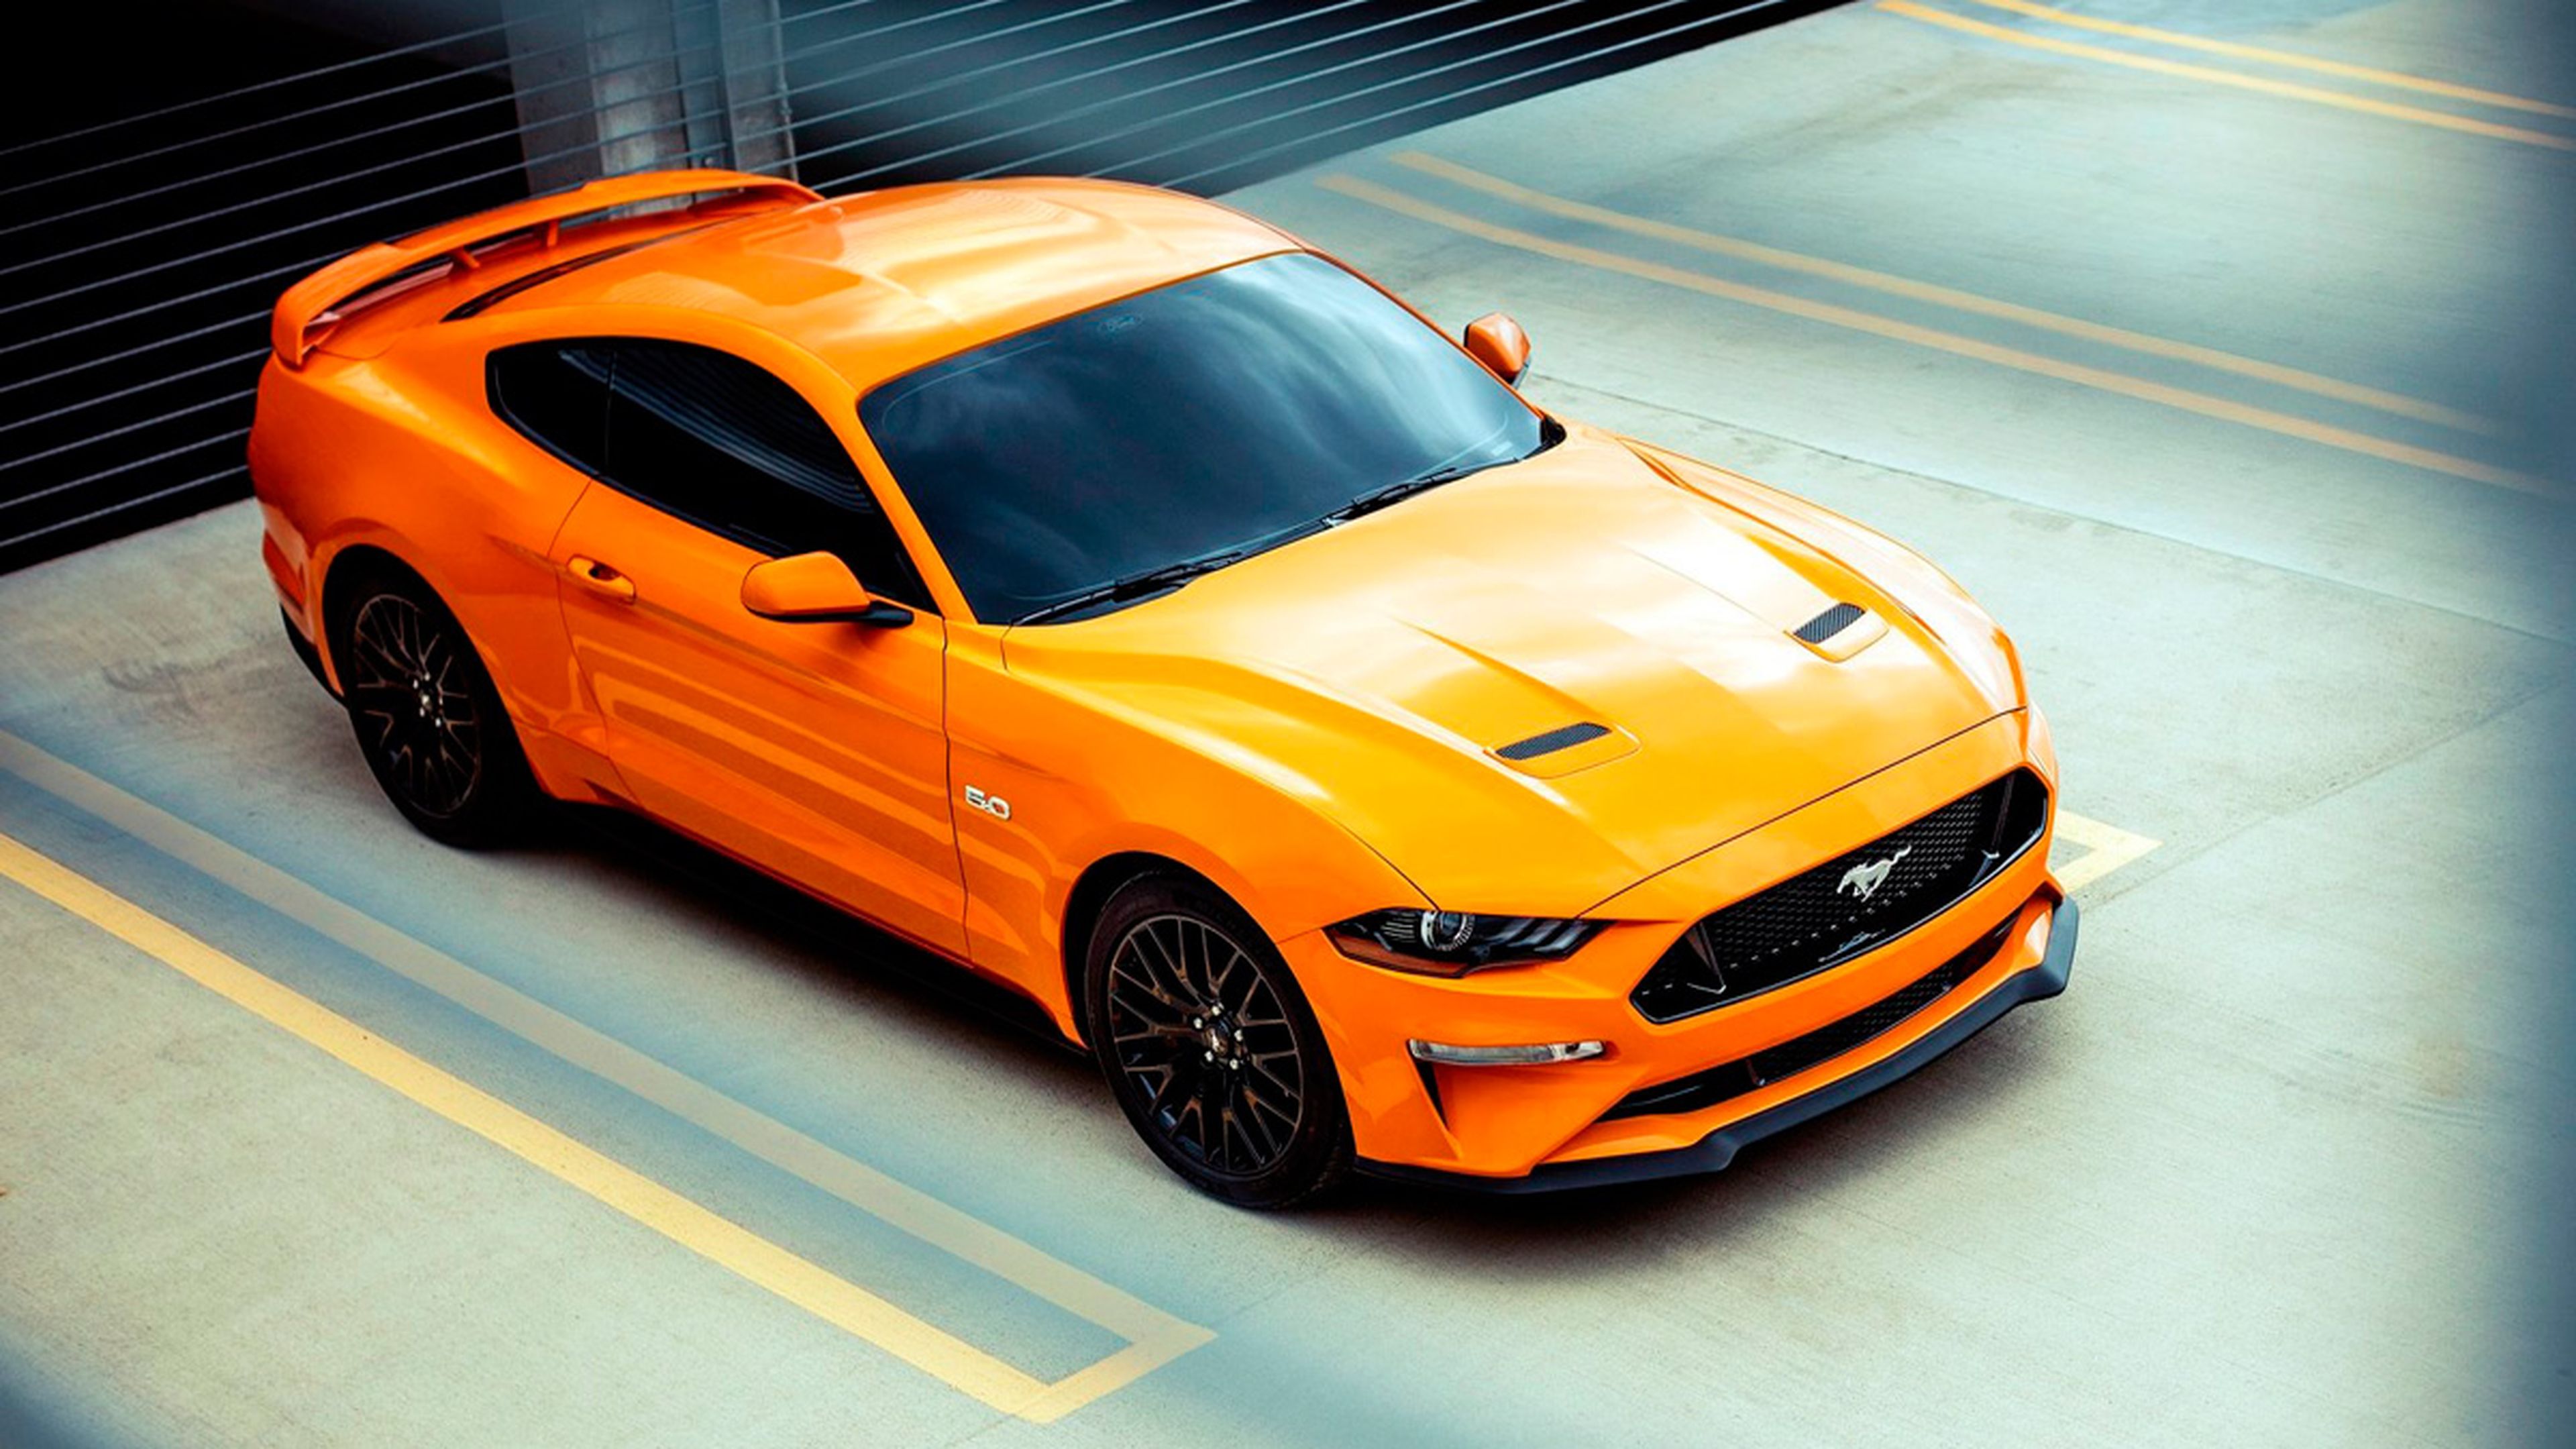 Coches baratos 300 CV. Ford Mustang GT